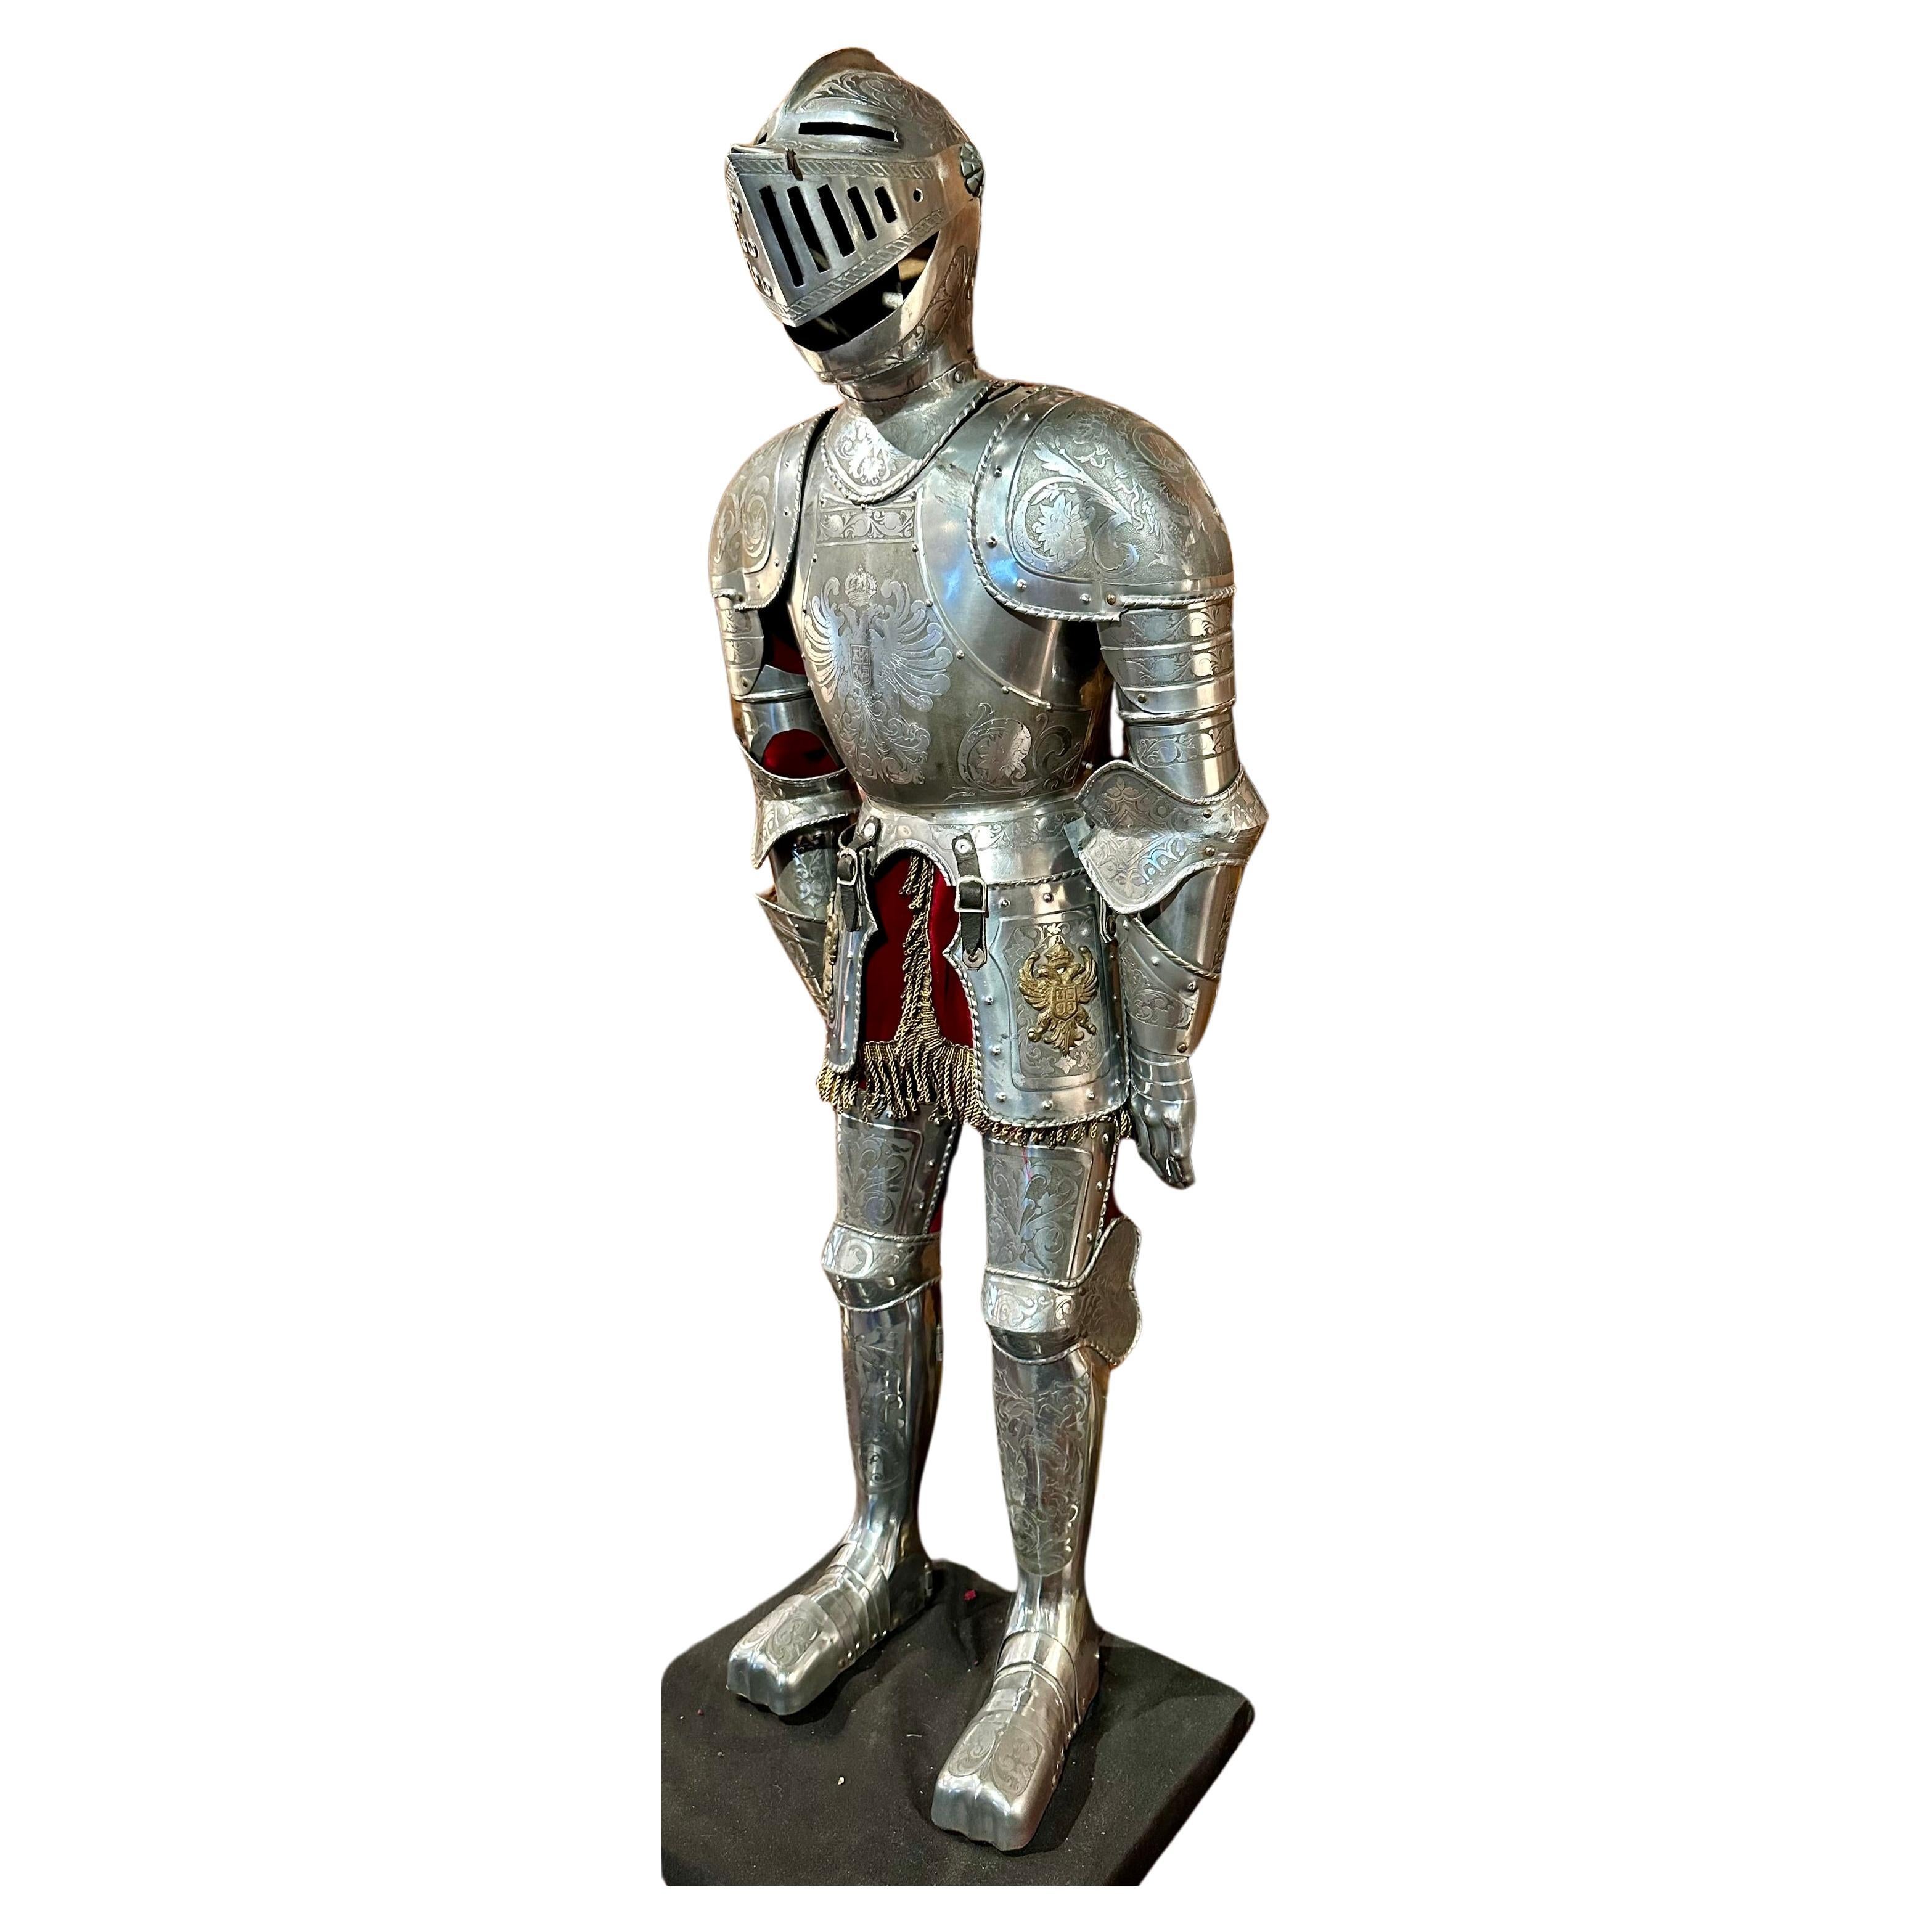 English Hand-Made Miniature Model Cavalier Coat of Arms, Hinged Medieval Knight's Armor For Sale